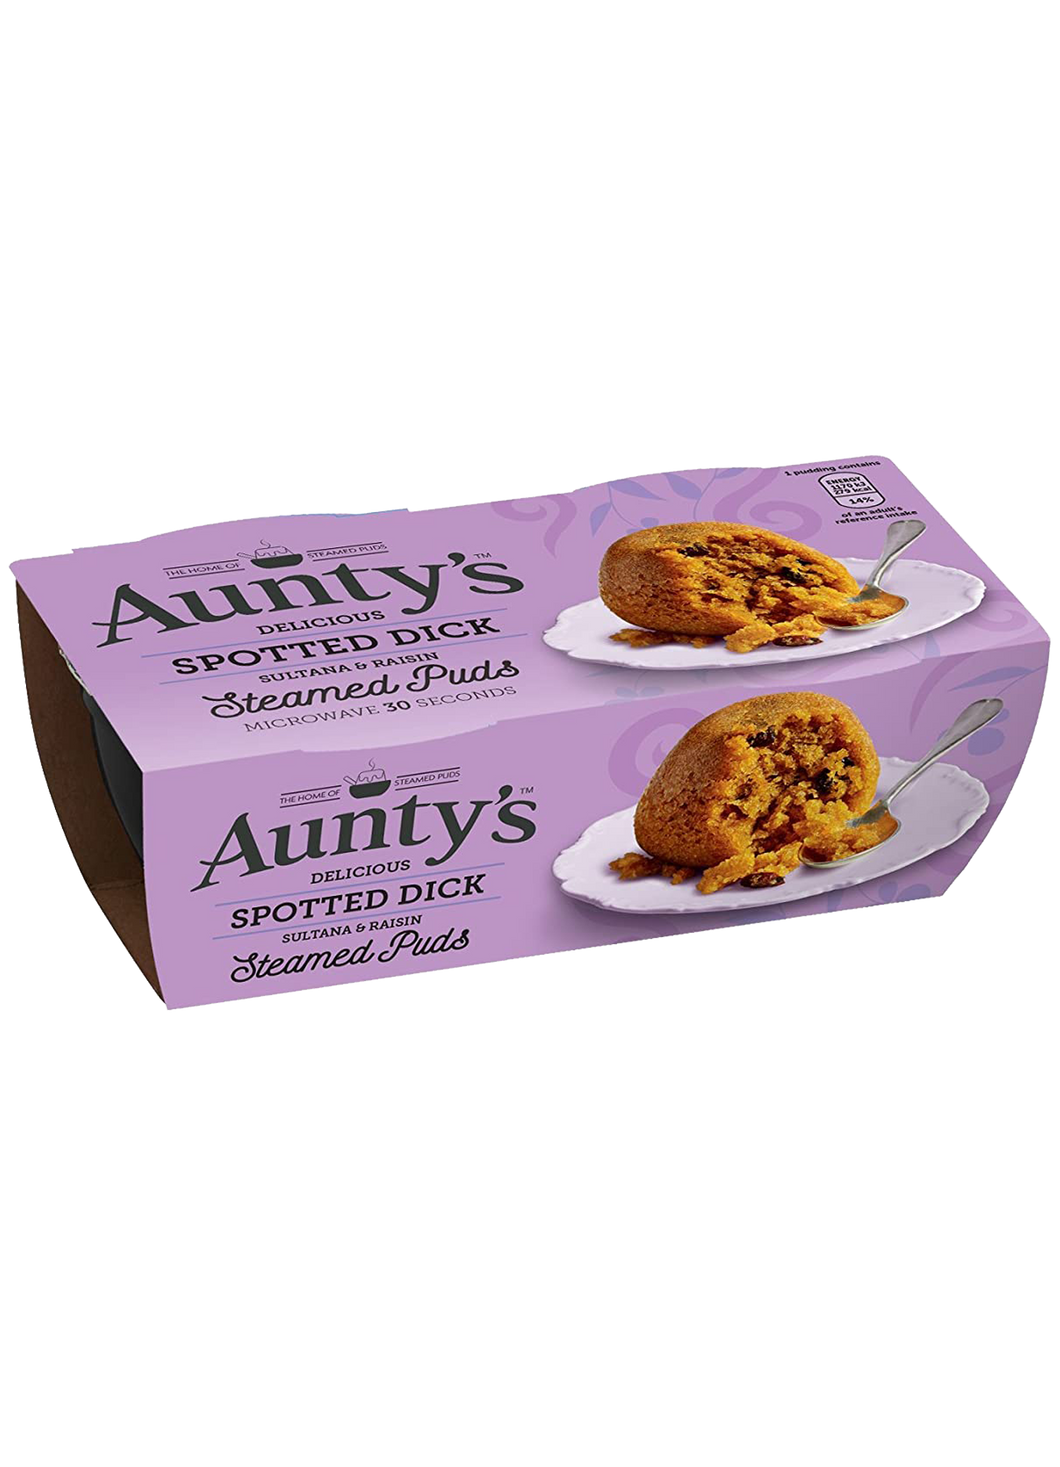 Aunty's Spotted Dick Steamed Puds (2 Puddings) 190g